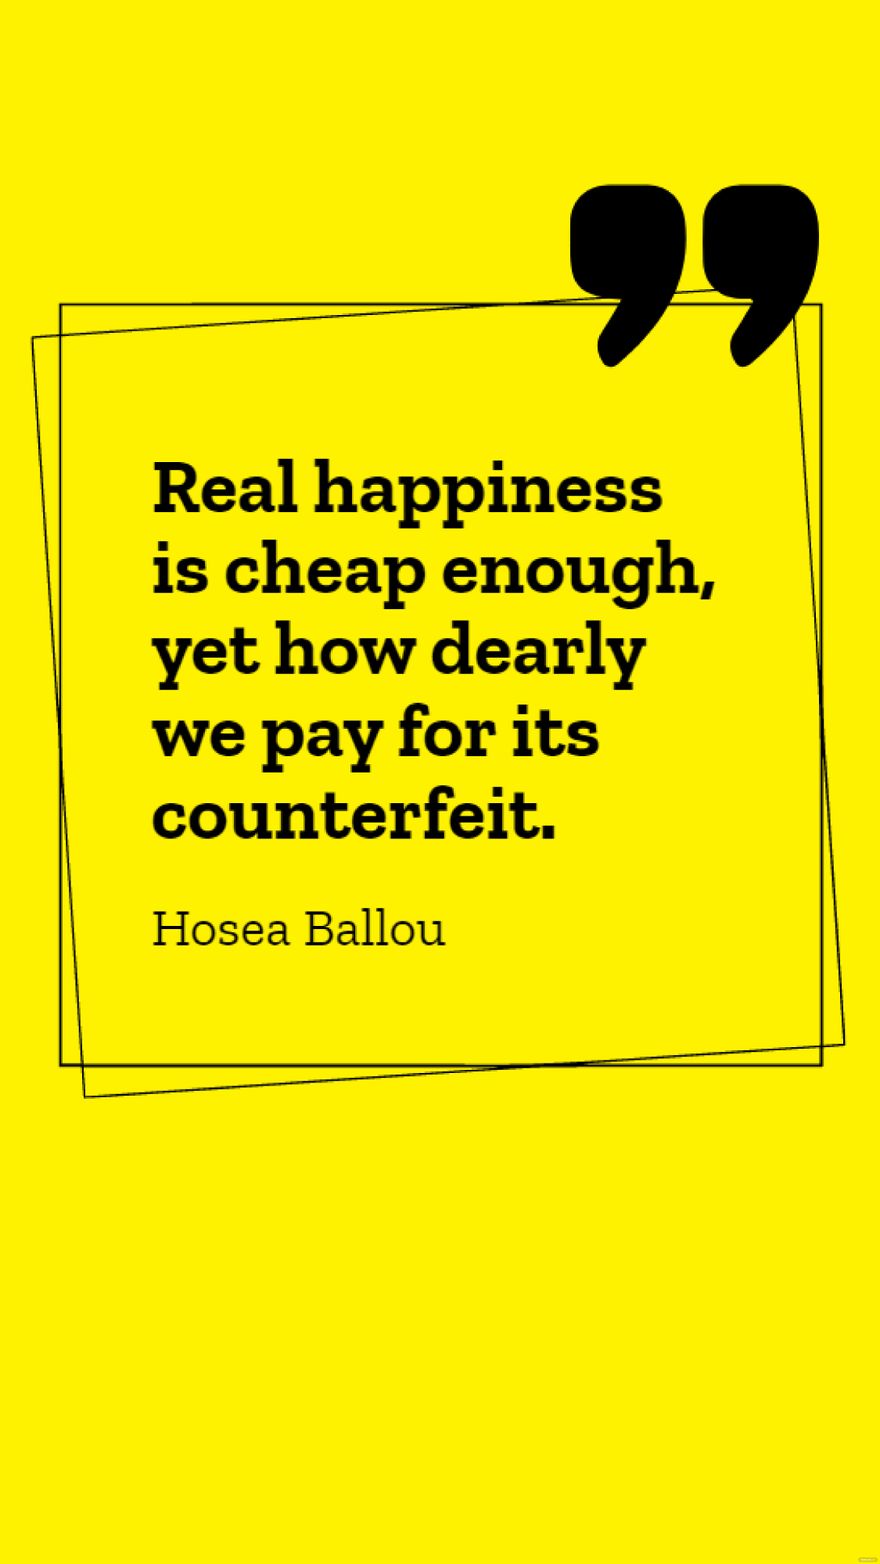 Hosea Ballou - Real happiness is cheap enough, yet how dearly we pay for its counterfeit.